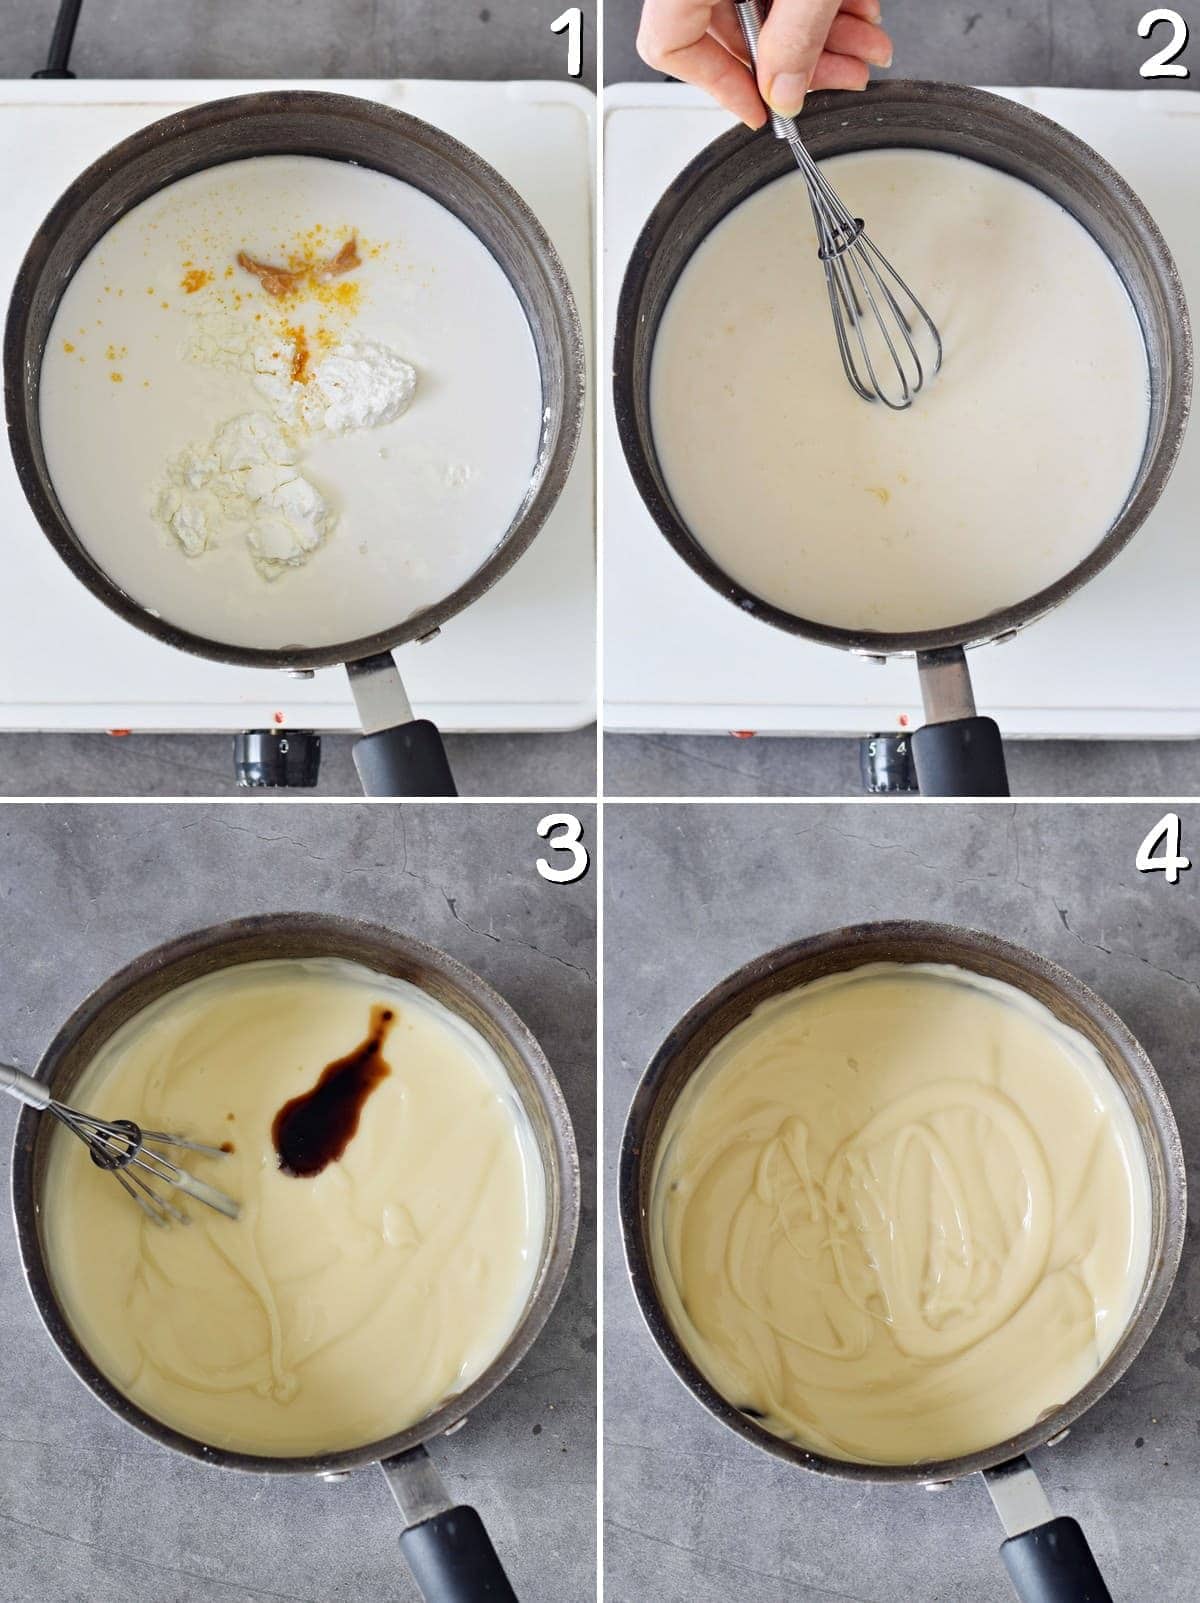 4 step-by-step photos showing how to make vanilla custard in a saucepan